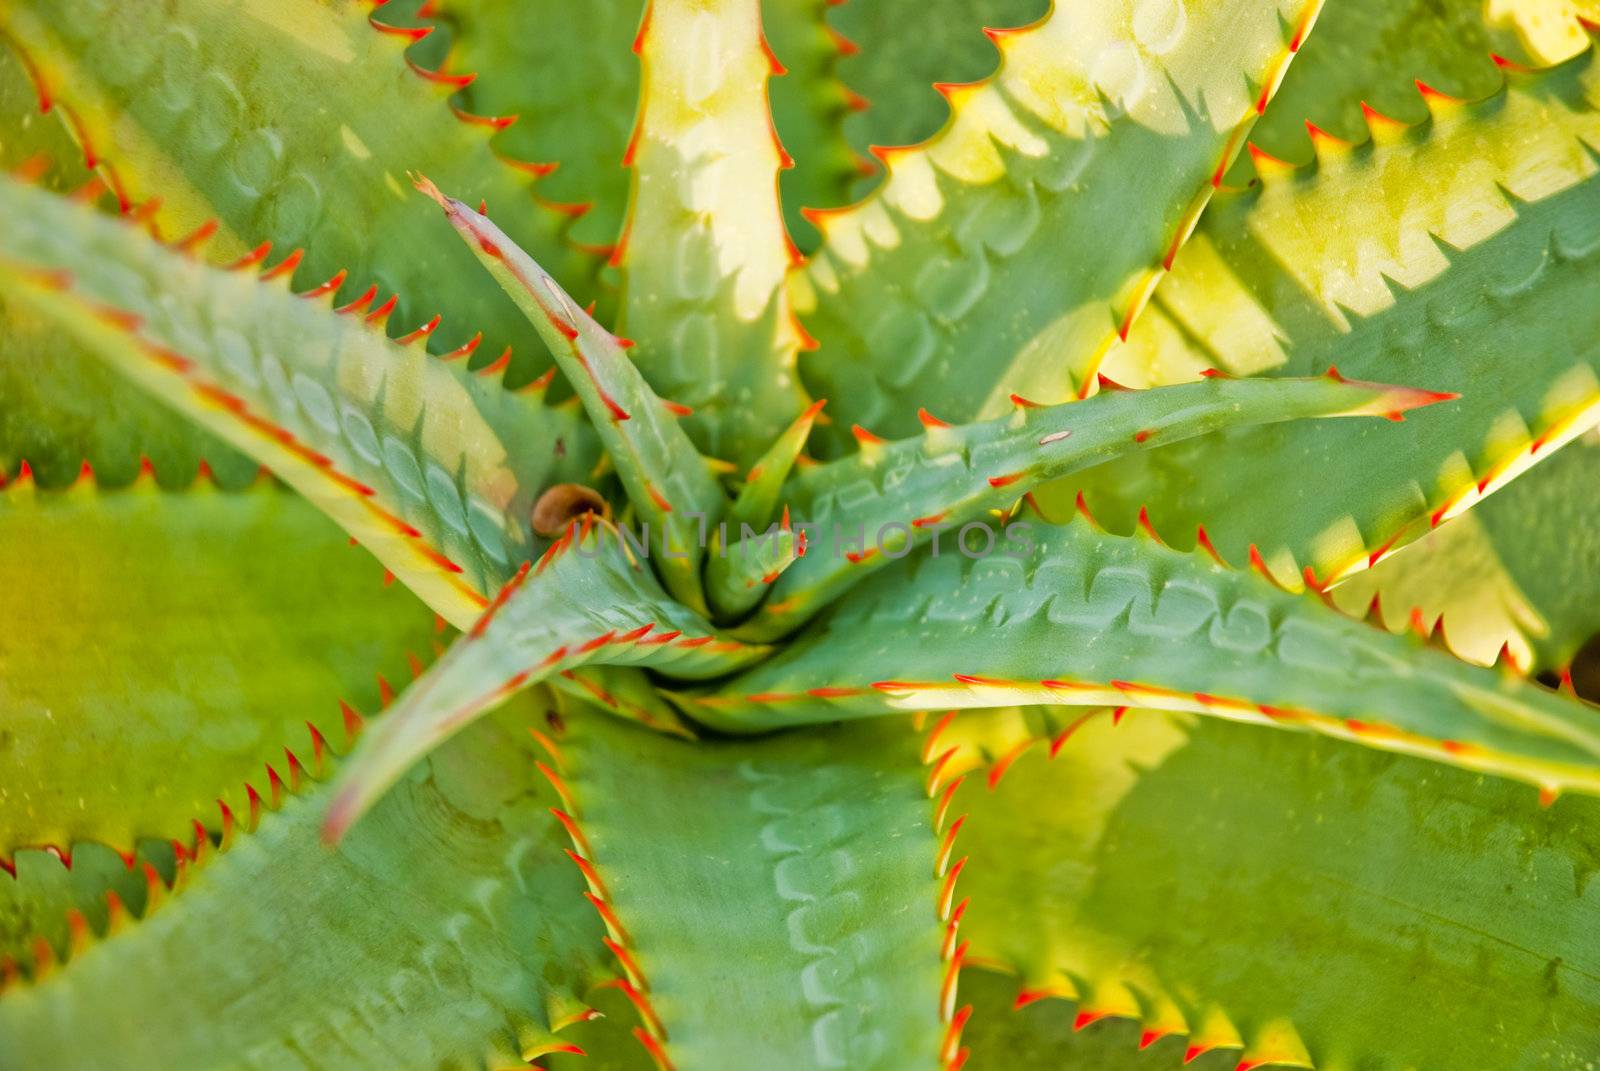 Aloe leaves with orange thorns by HeinSchlebusch